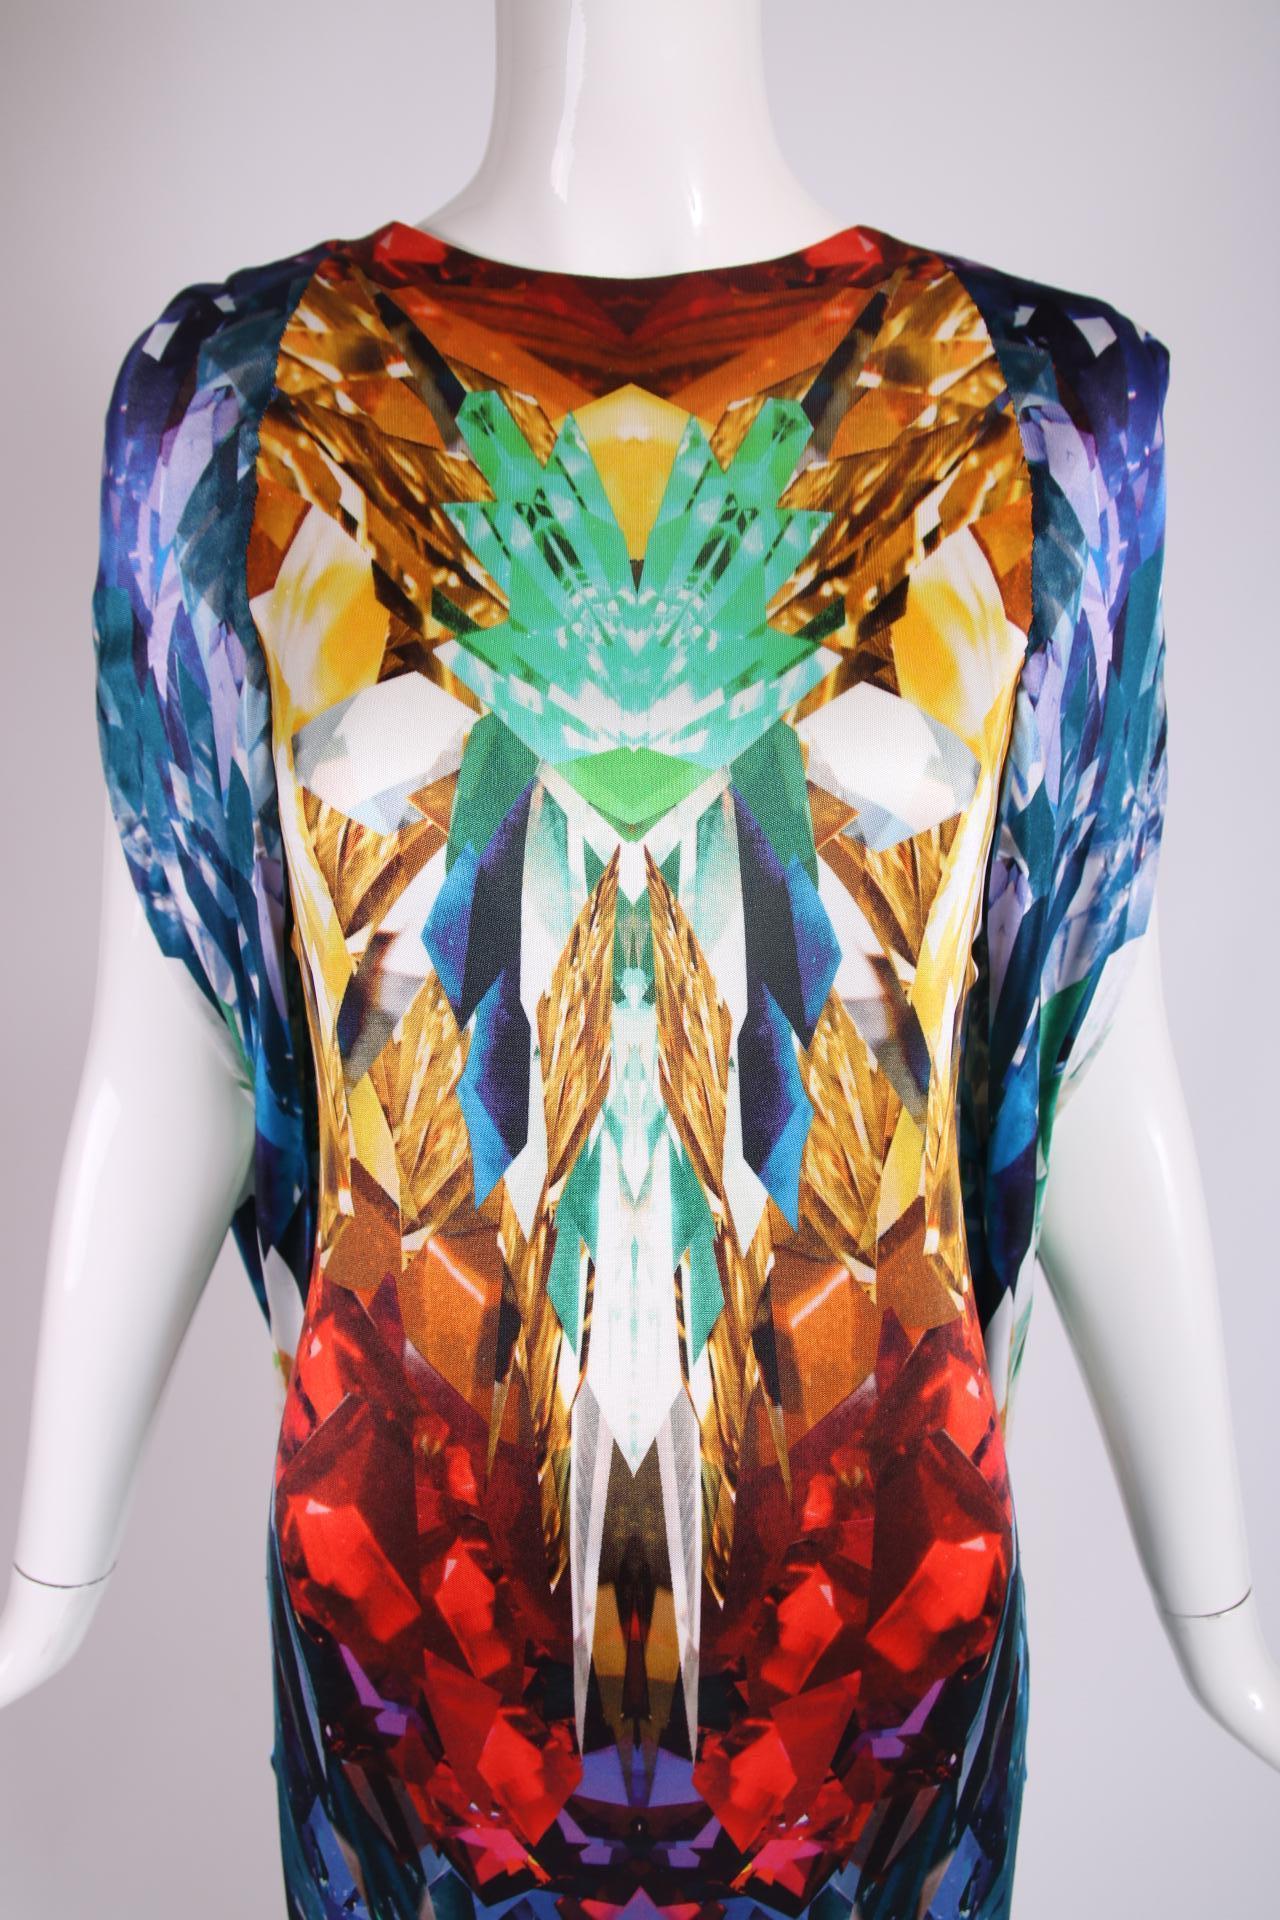 Alexander McQueen Crystal Kaleidoscope Dress w/Cape S/S 2009 Natural Distinction In Excellent Condition For Sale In Studio City, CA